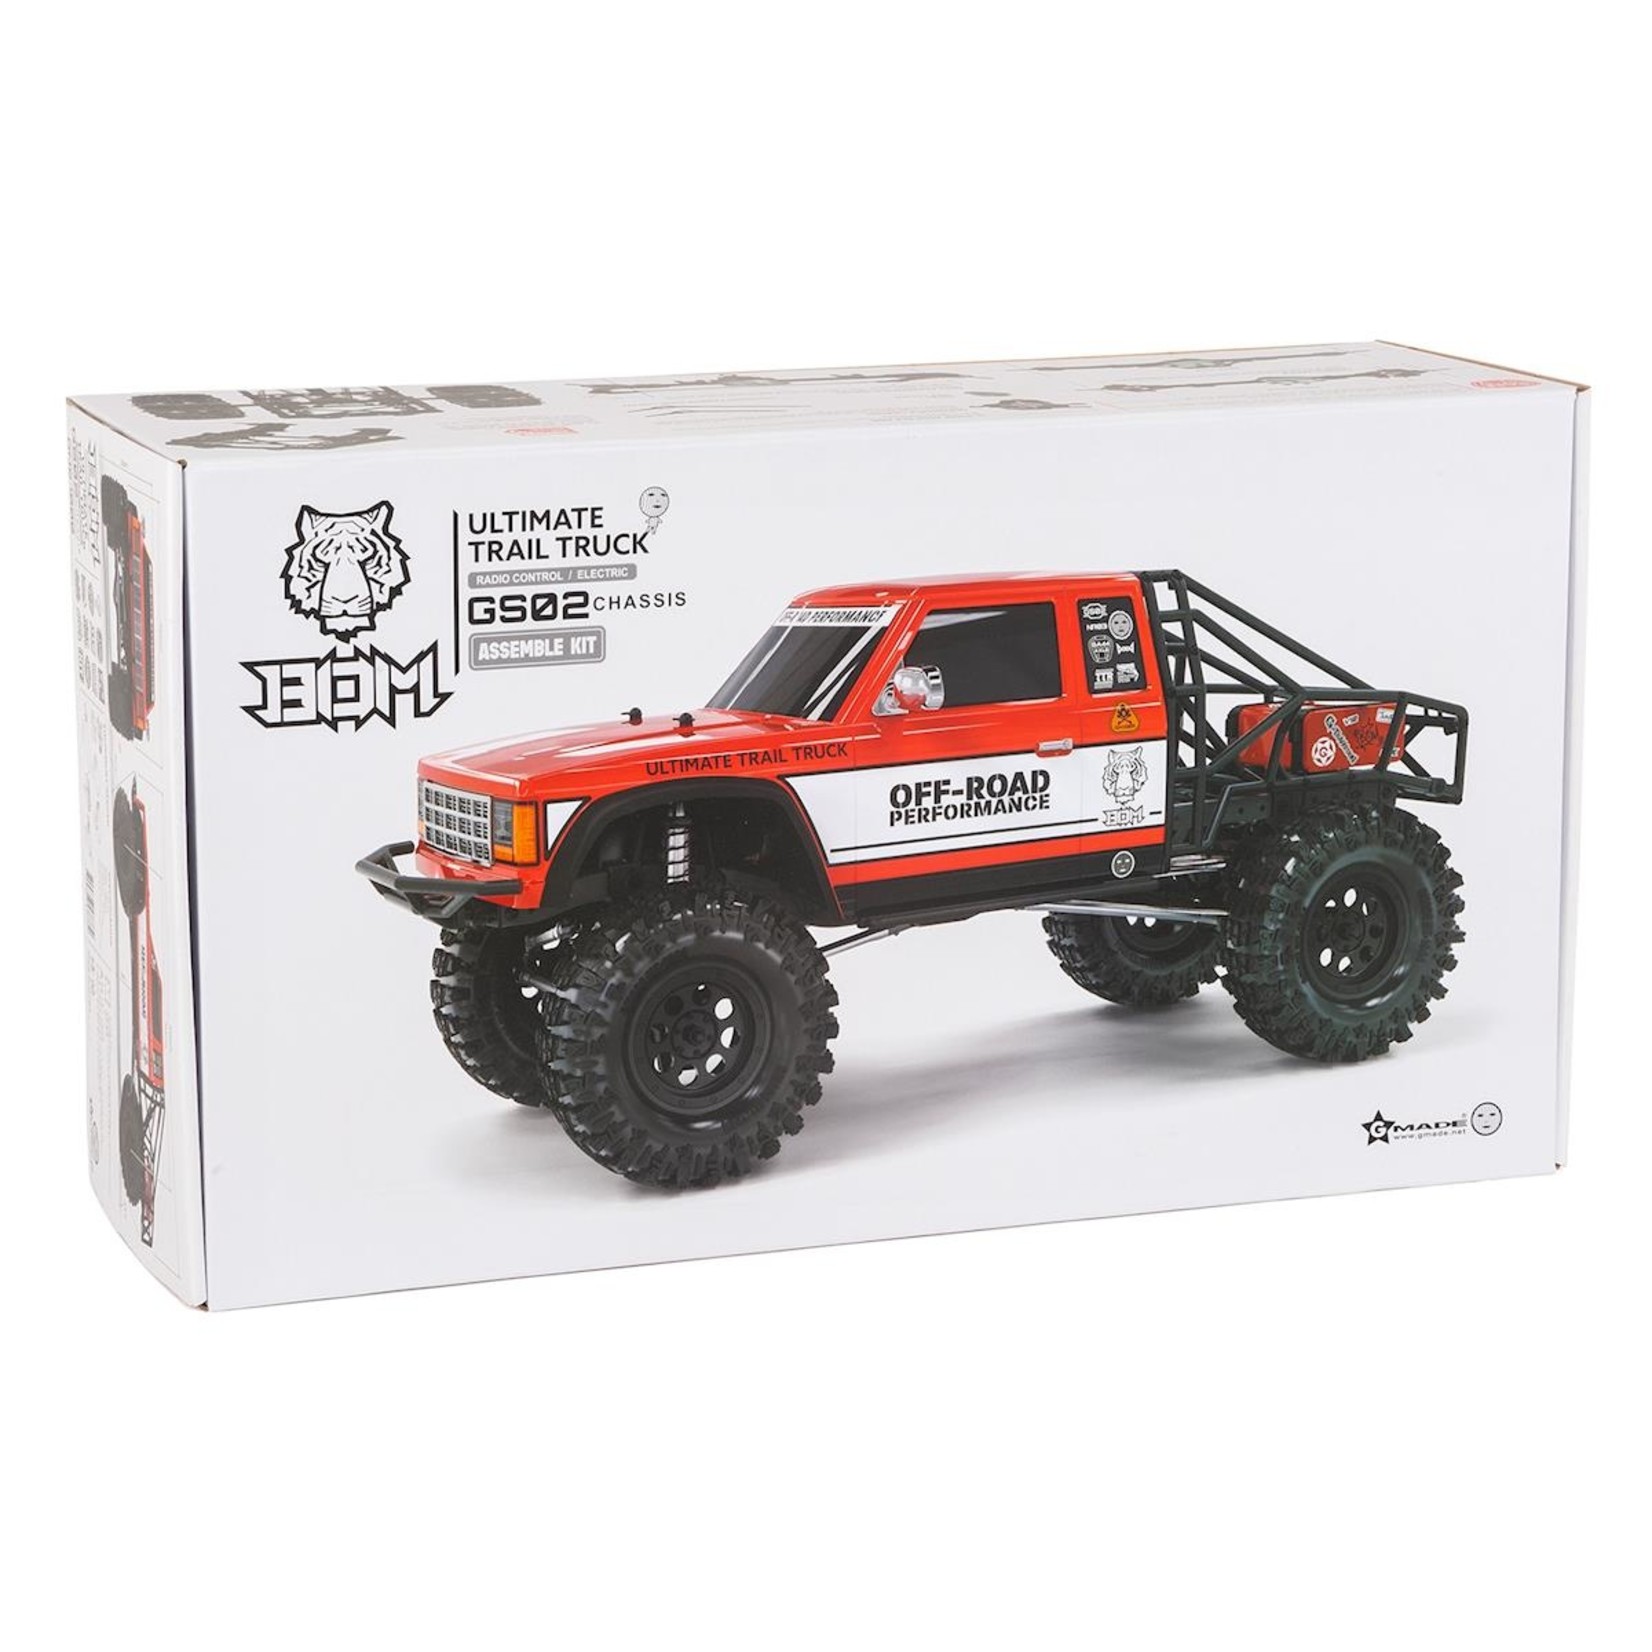 Gmade Gmade BOM GS02 1/10 4WD Ultimate Trail Truck Rock Crawler Kit #GM57000